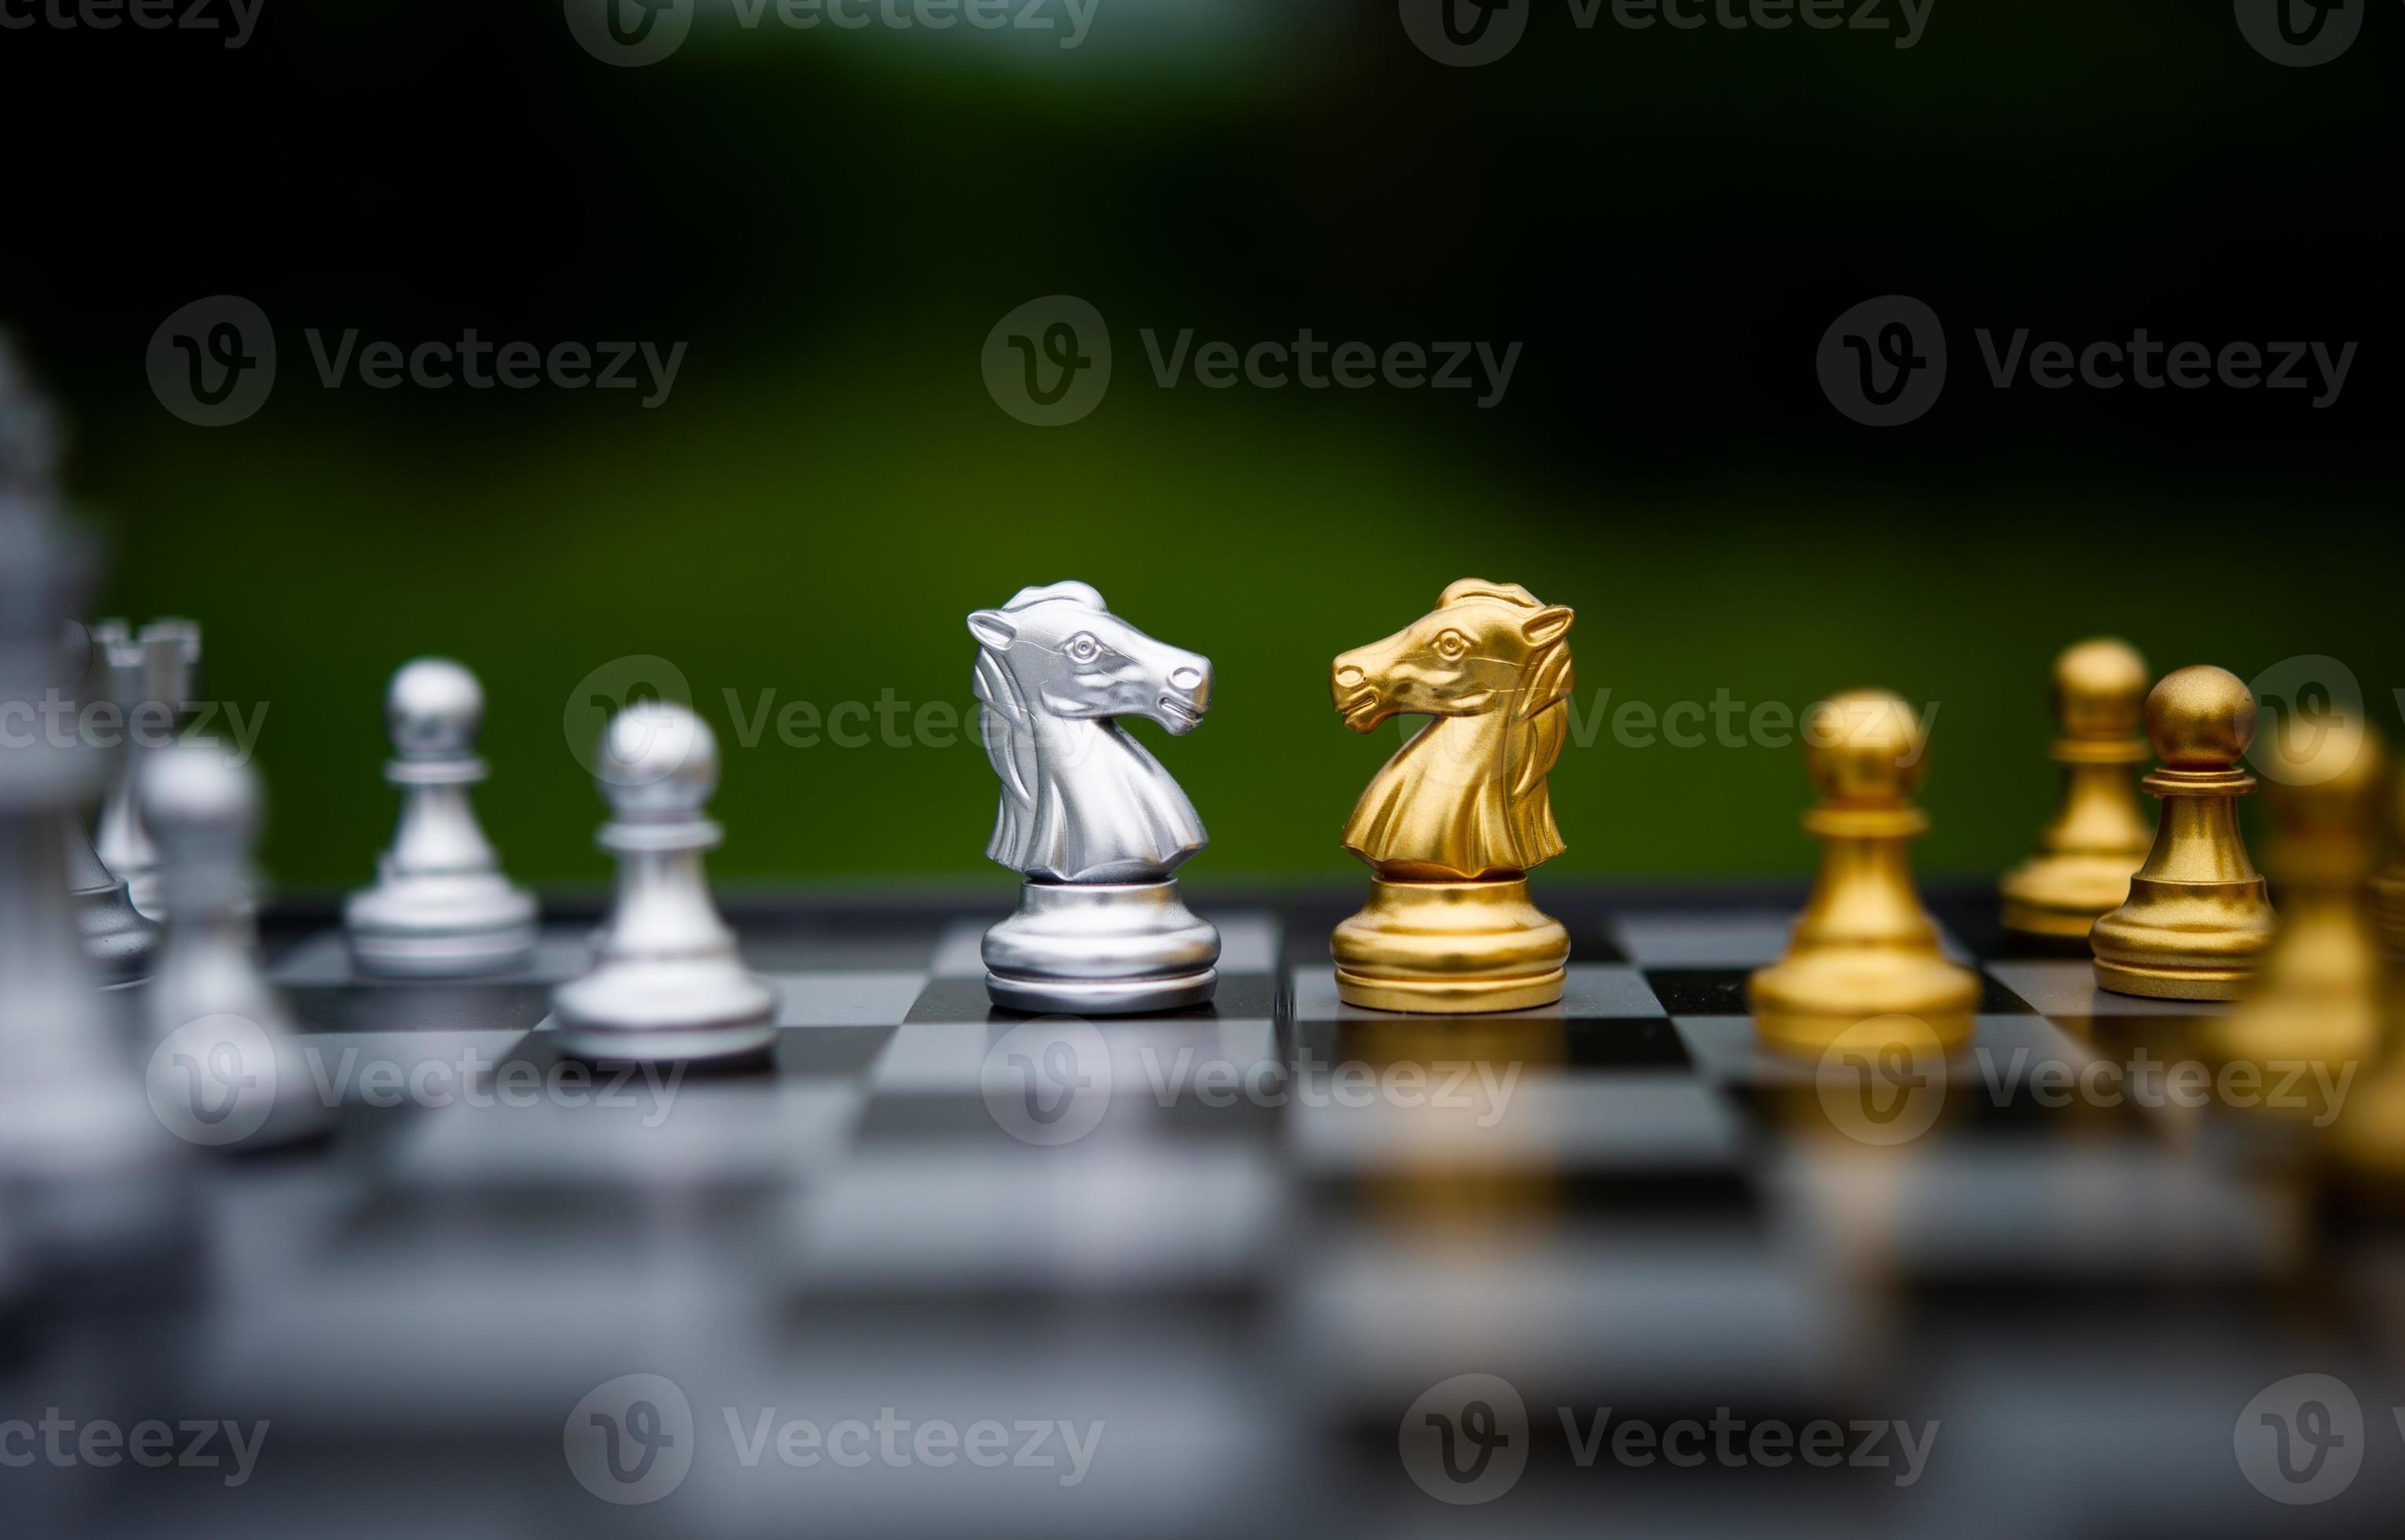 Play Chess Games by Game Biz